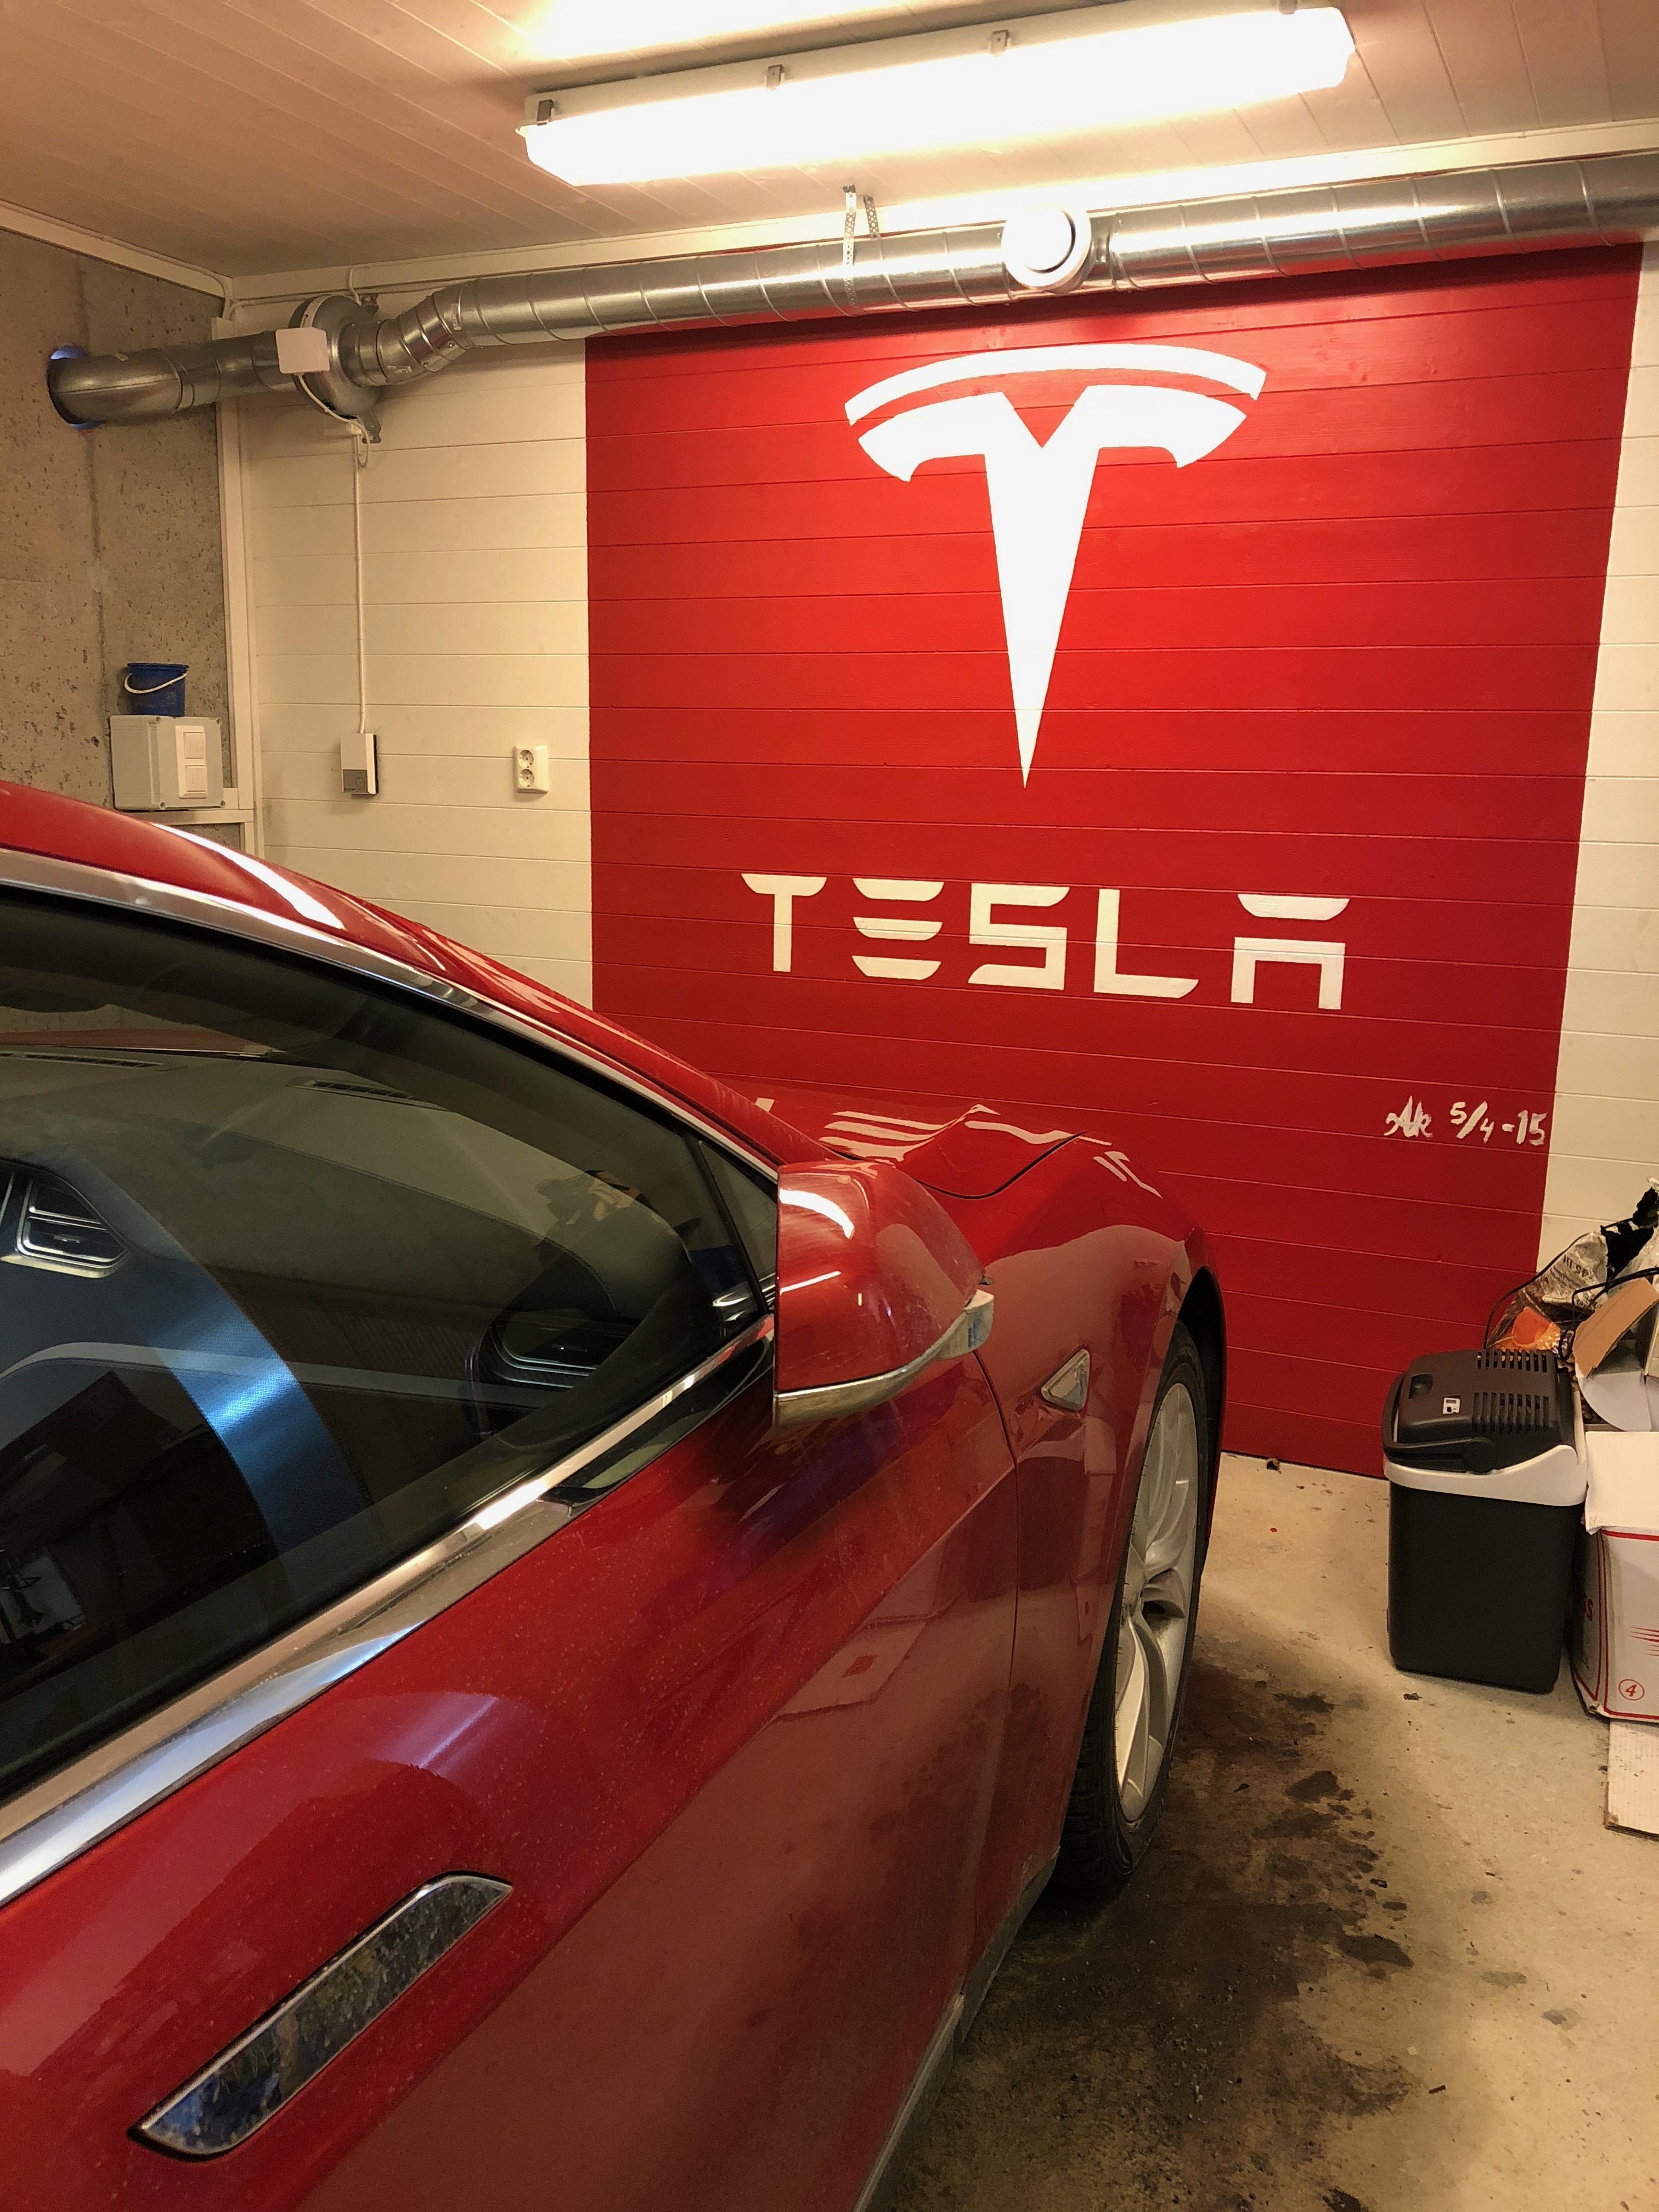 Personal Garage Logo - My dad painted the Tesla logo in his garage a few years ago while ...